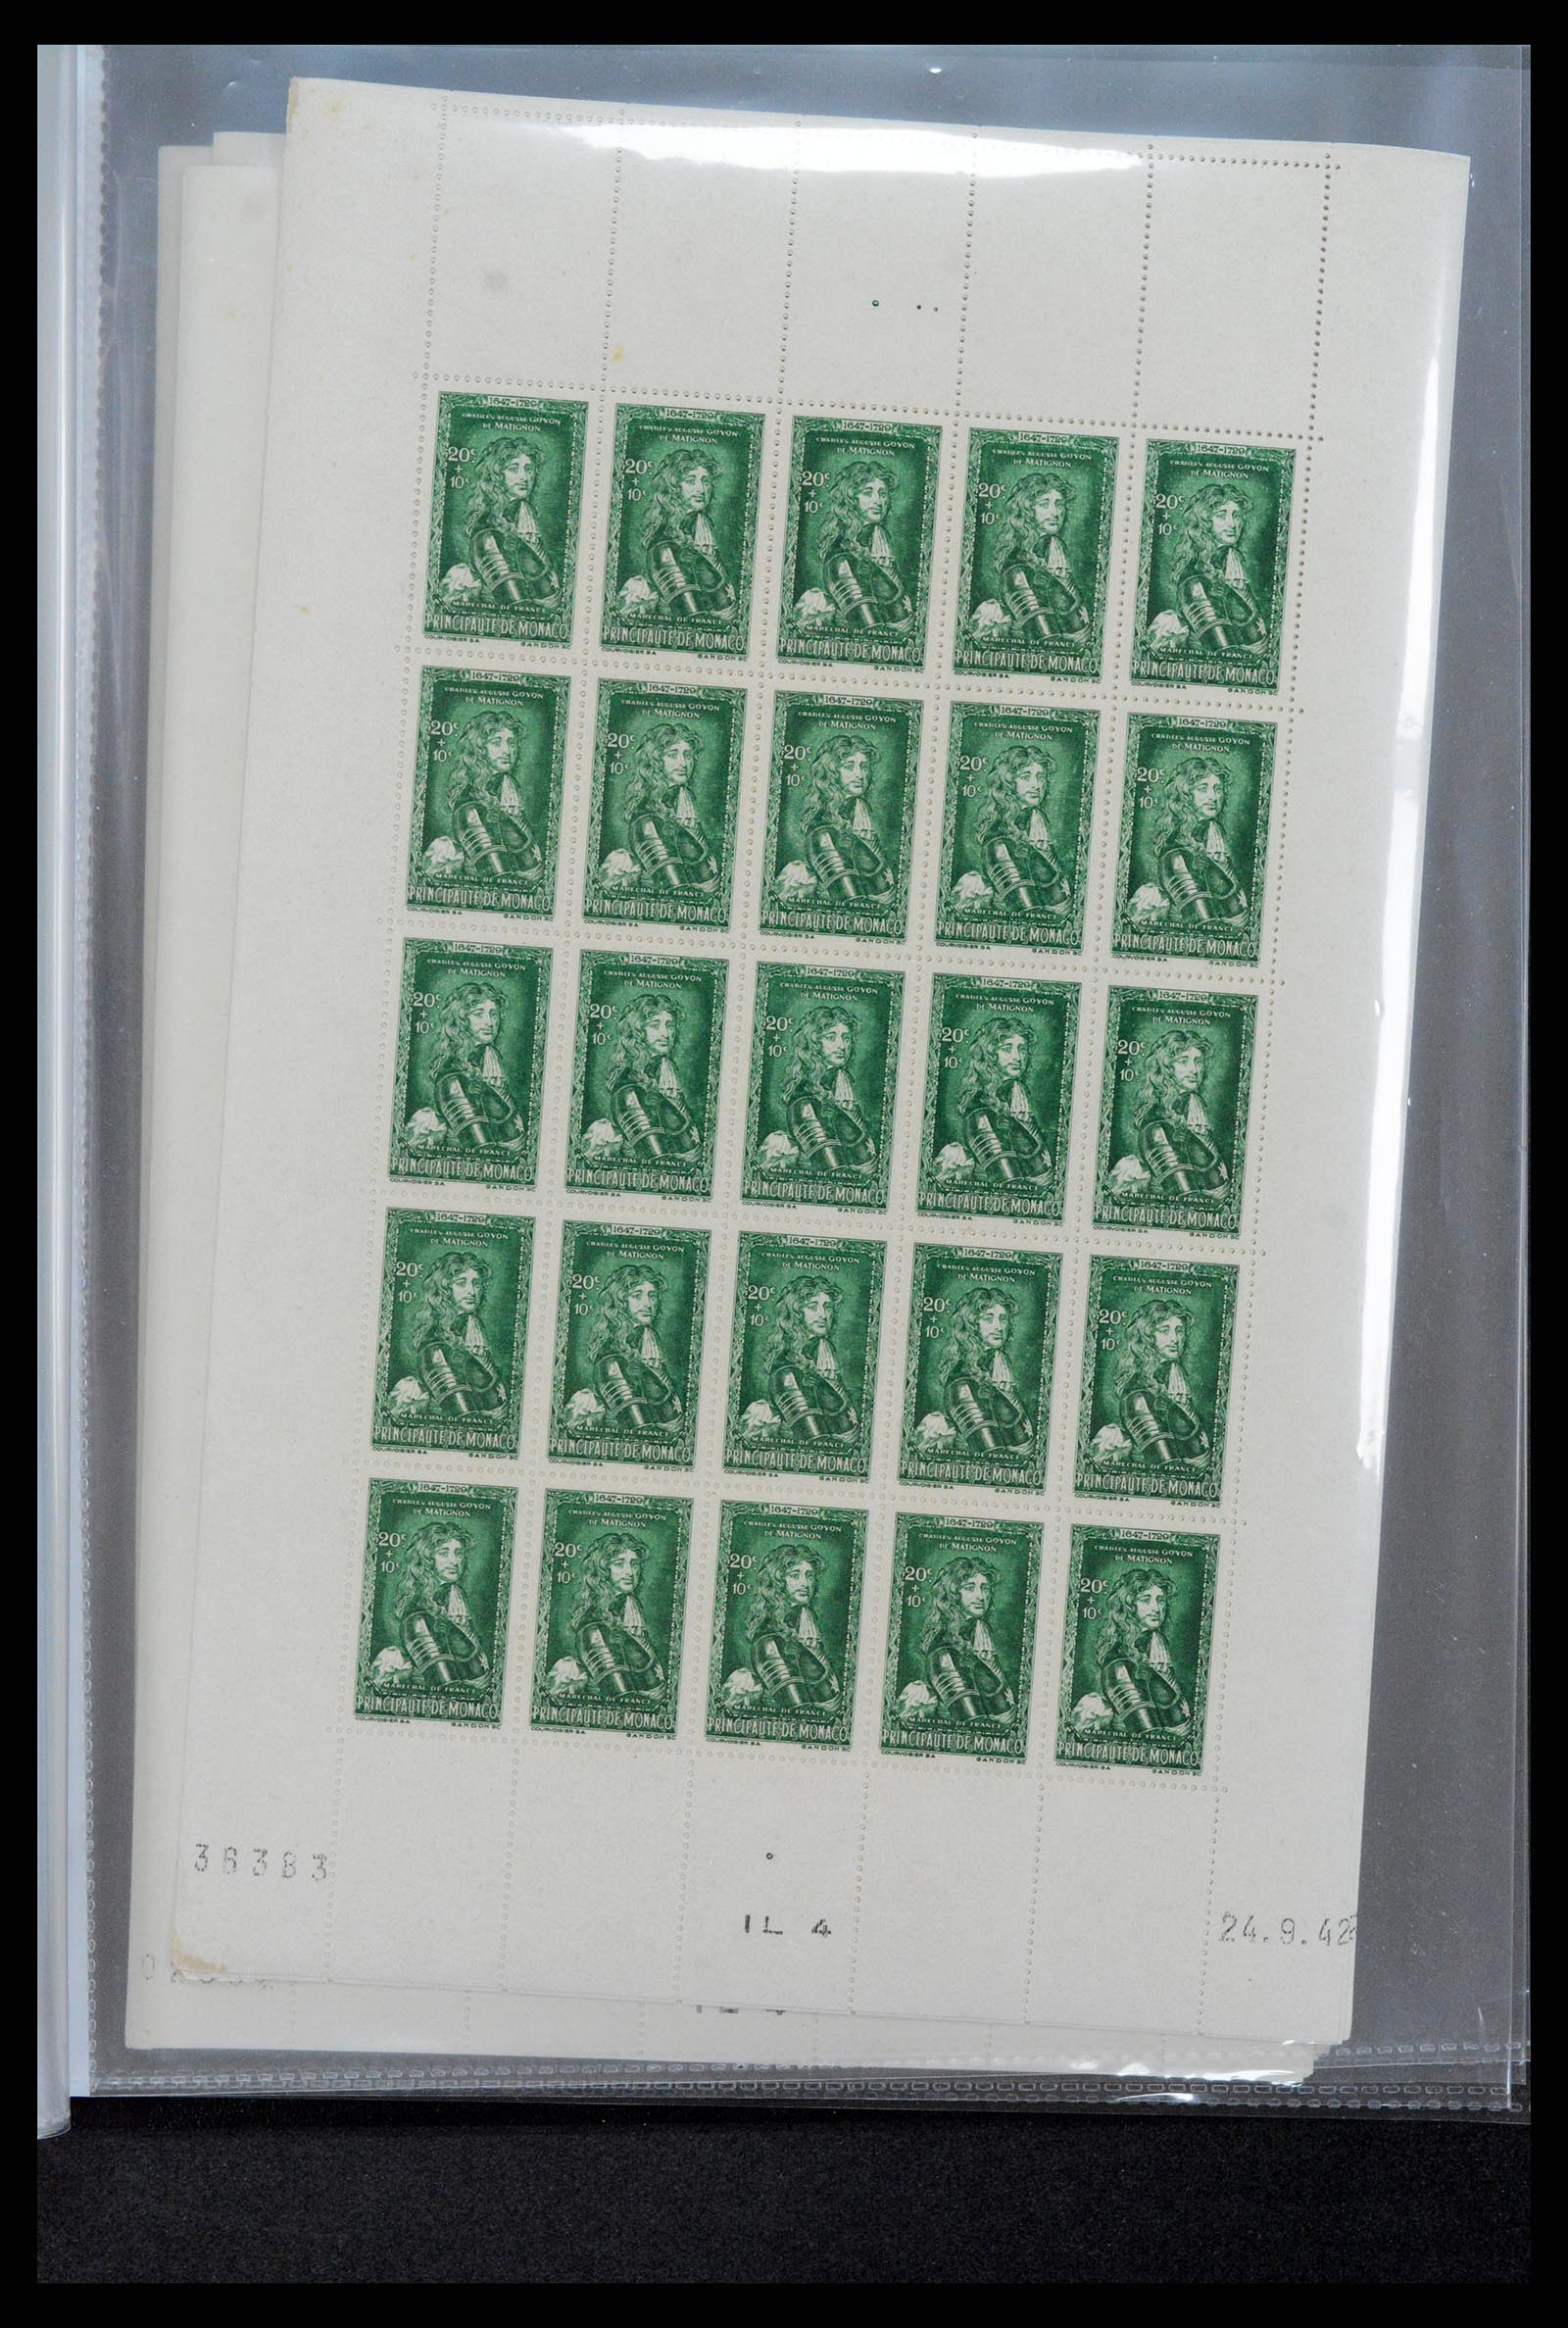 37984 029 - Stamp collection 37984 Monaco better issues 1942-1982.